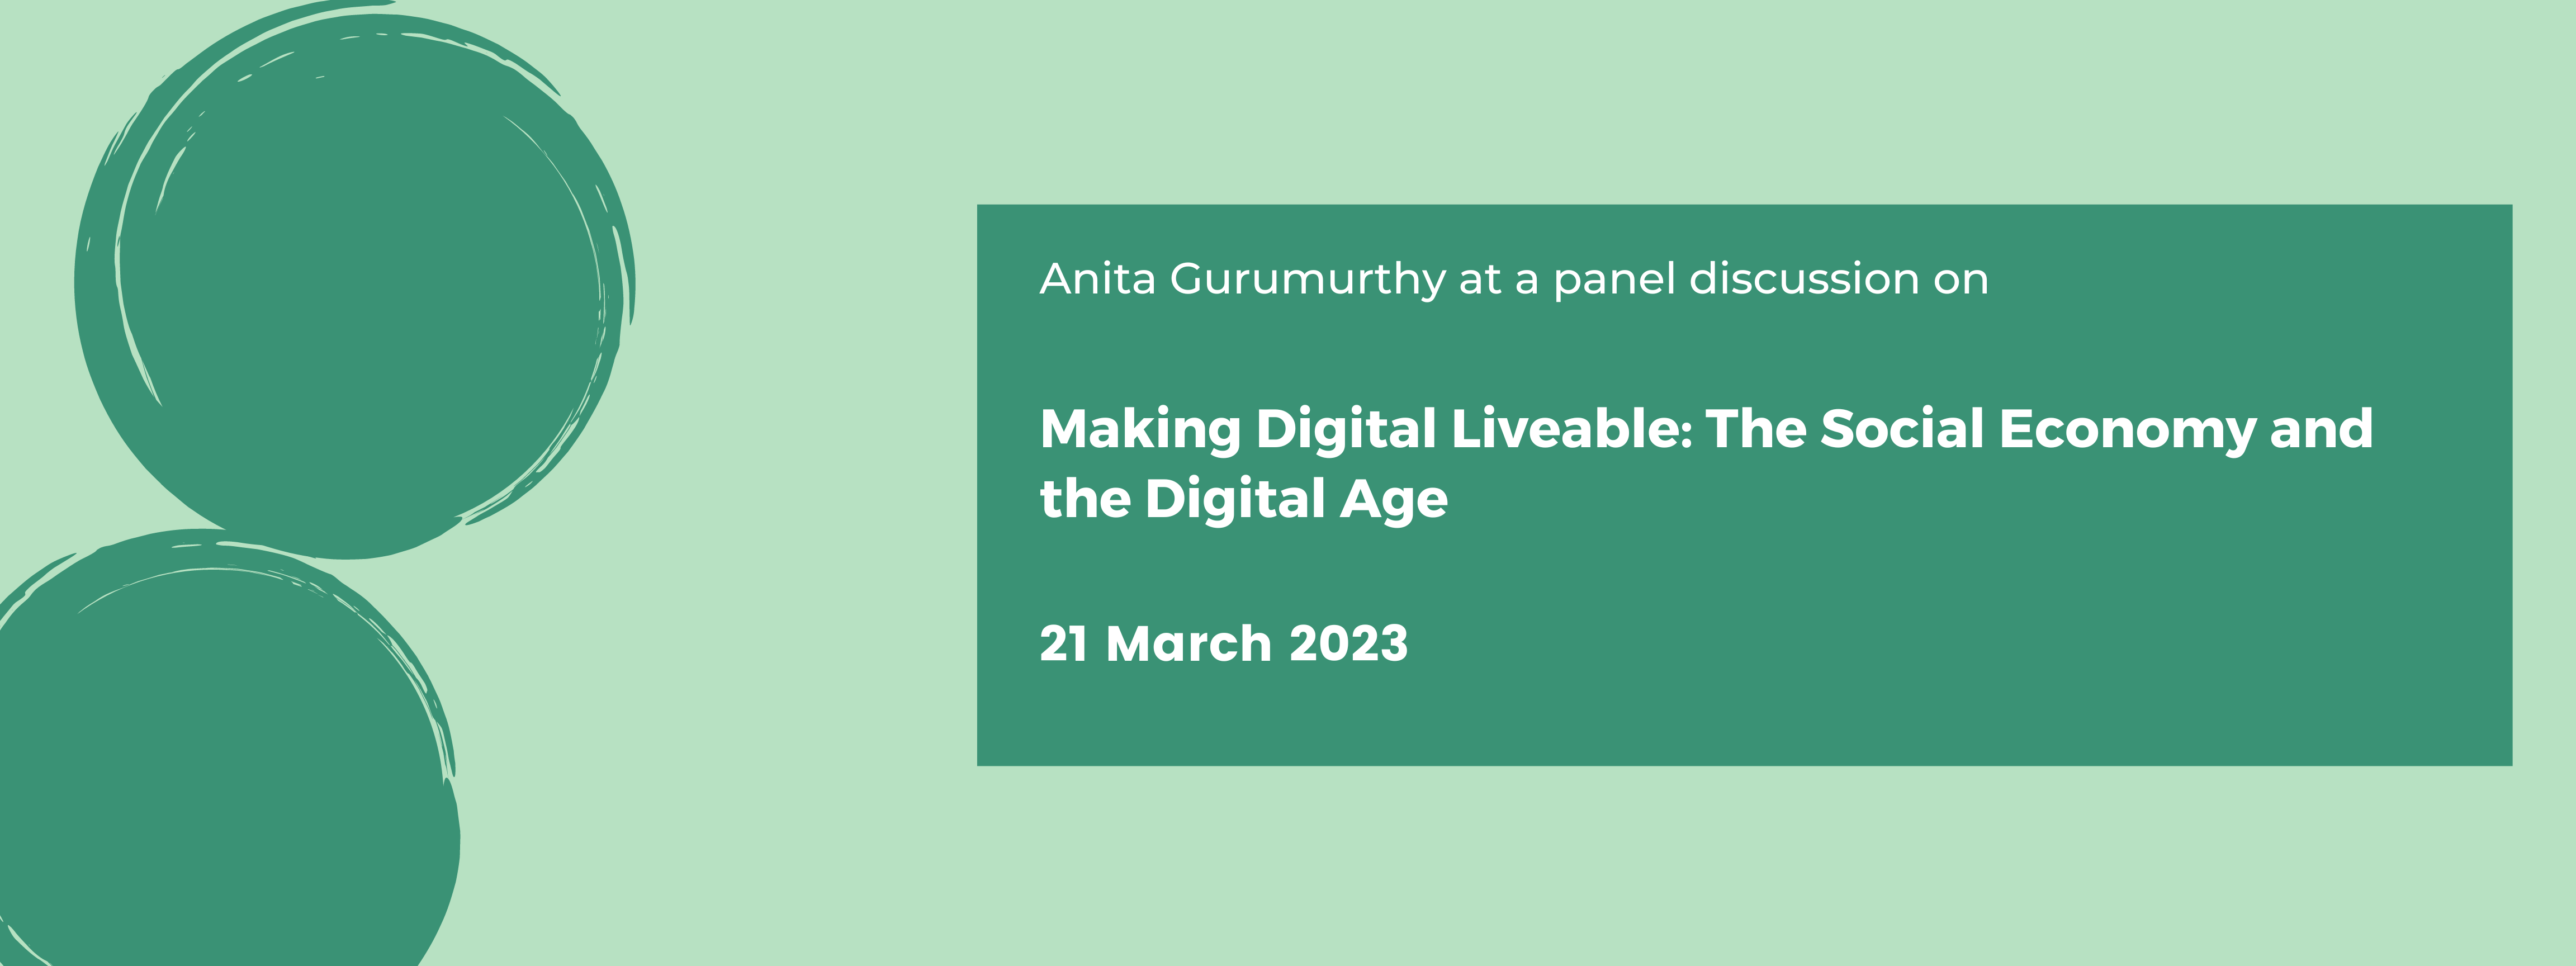 Making Digital Liveable: The Social Economy and the Digital Age